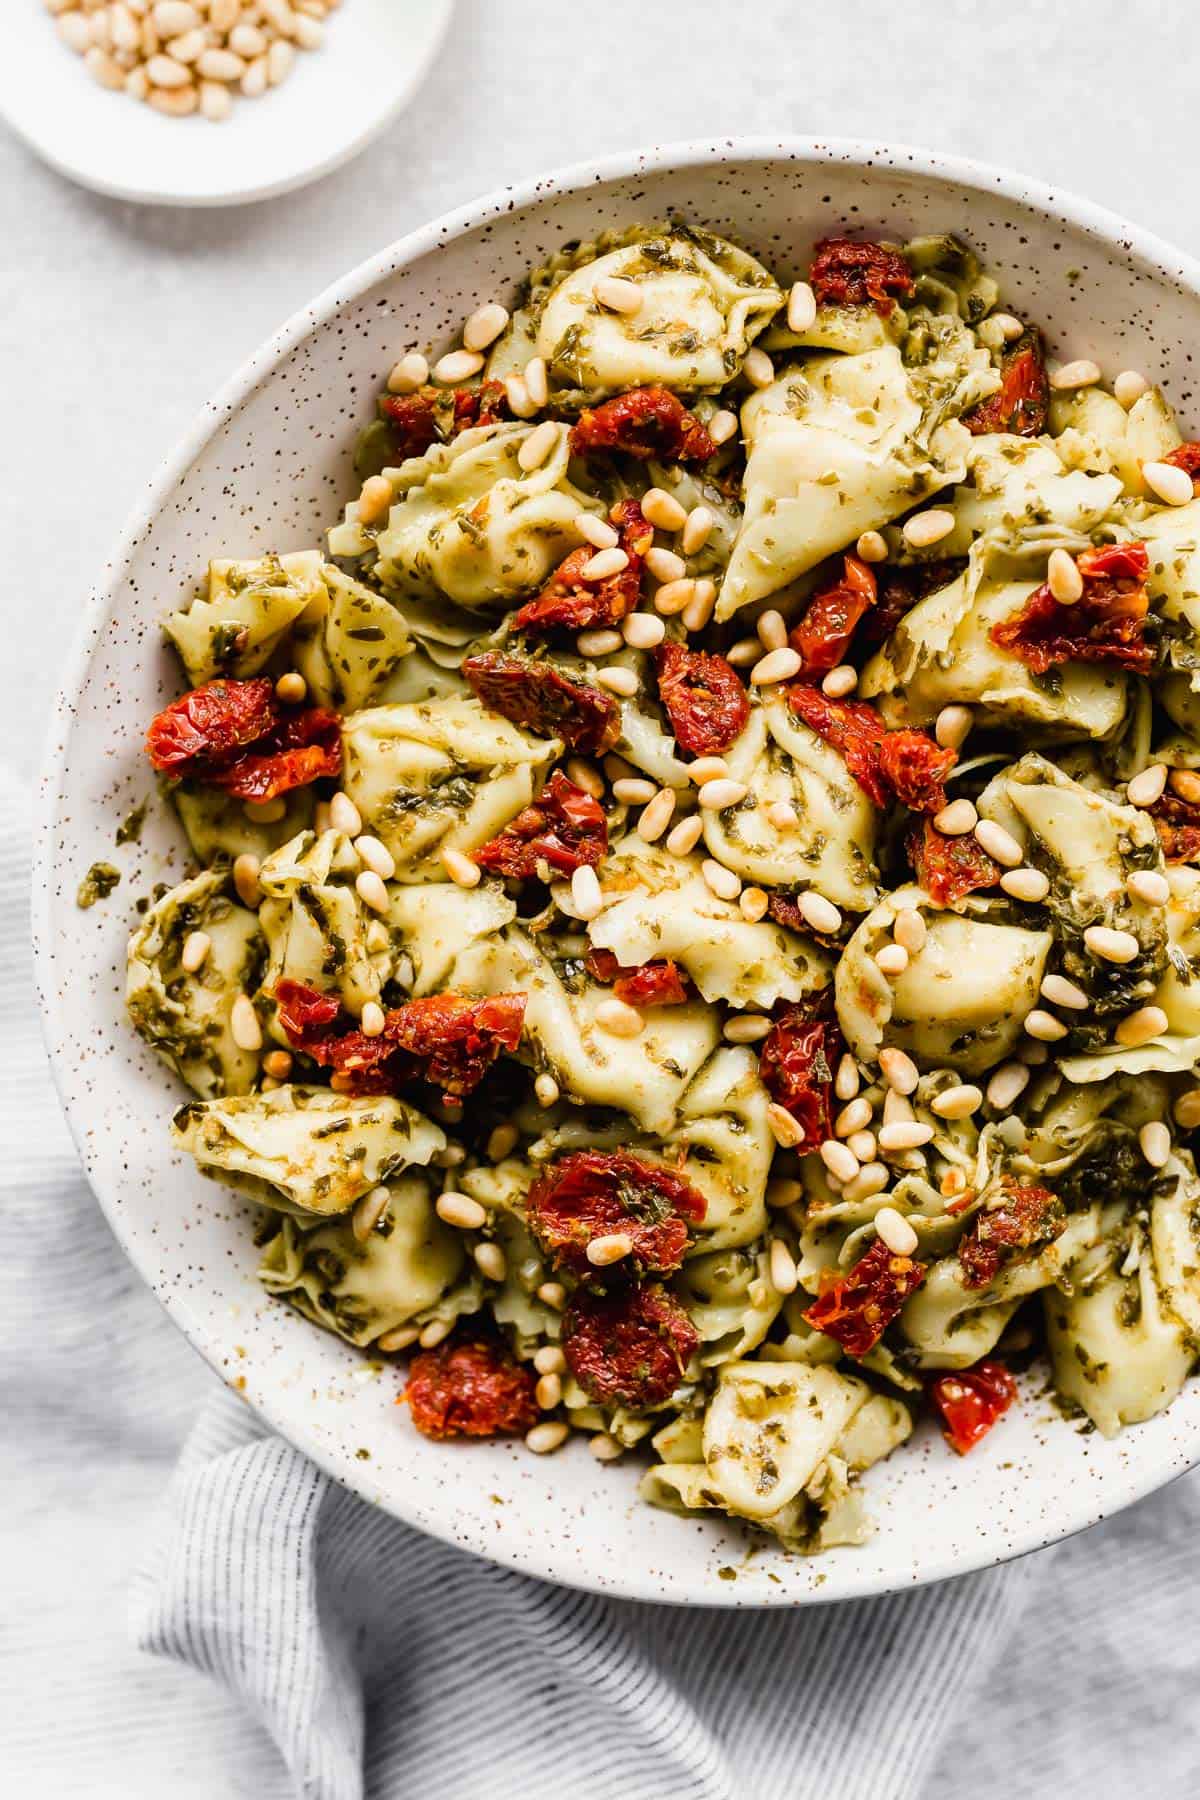 Pesto Tortellini Pasta Salad with sun-dried tomatoes and pine nuts.